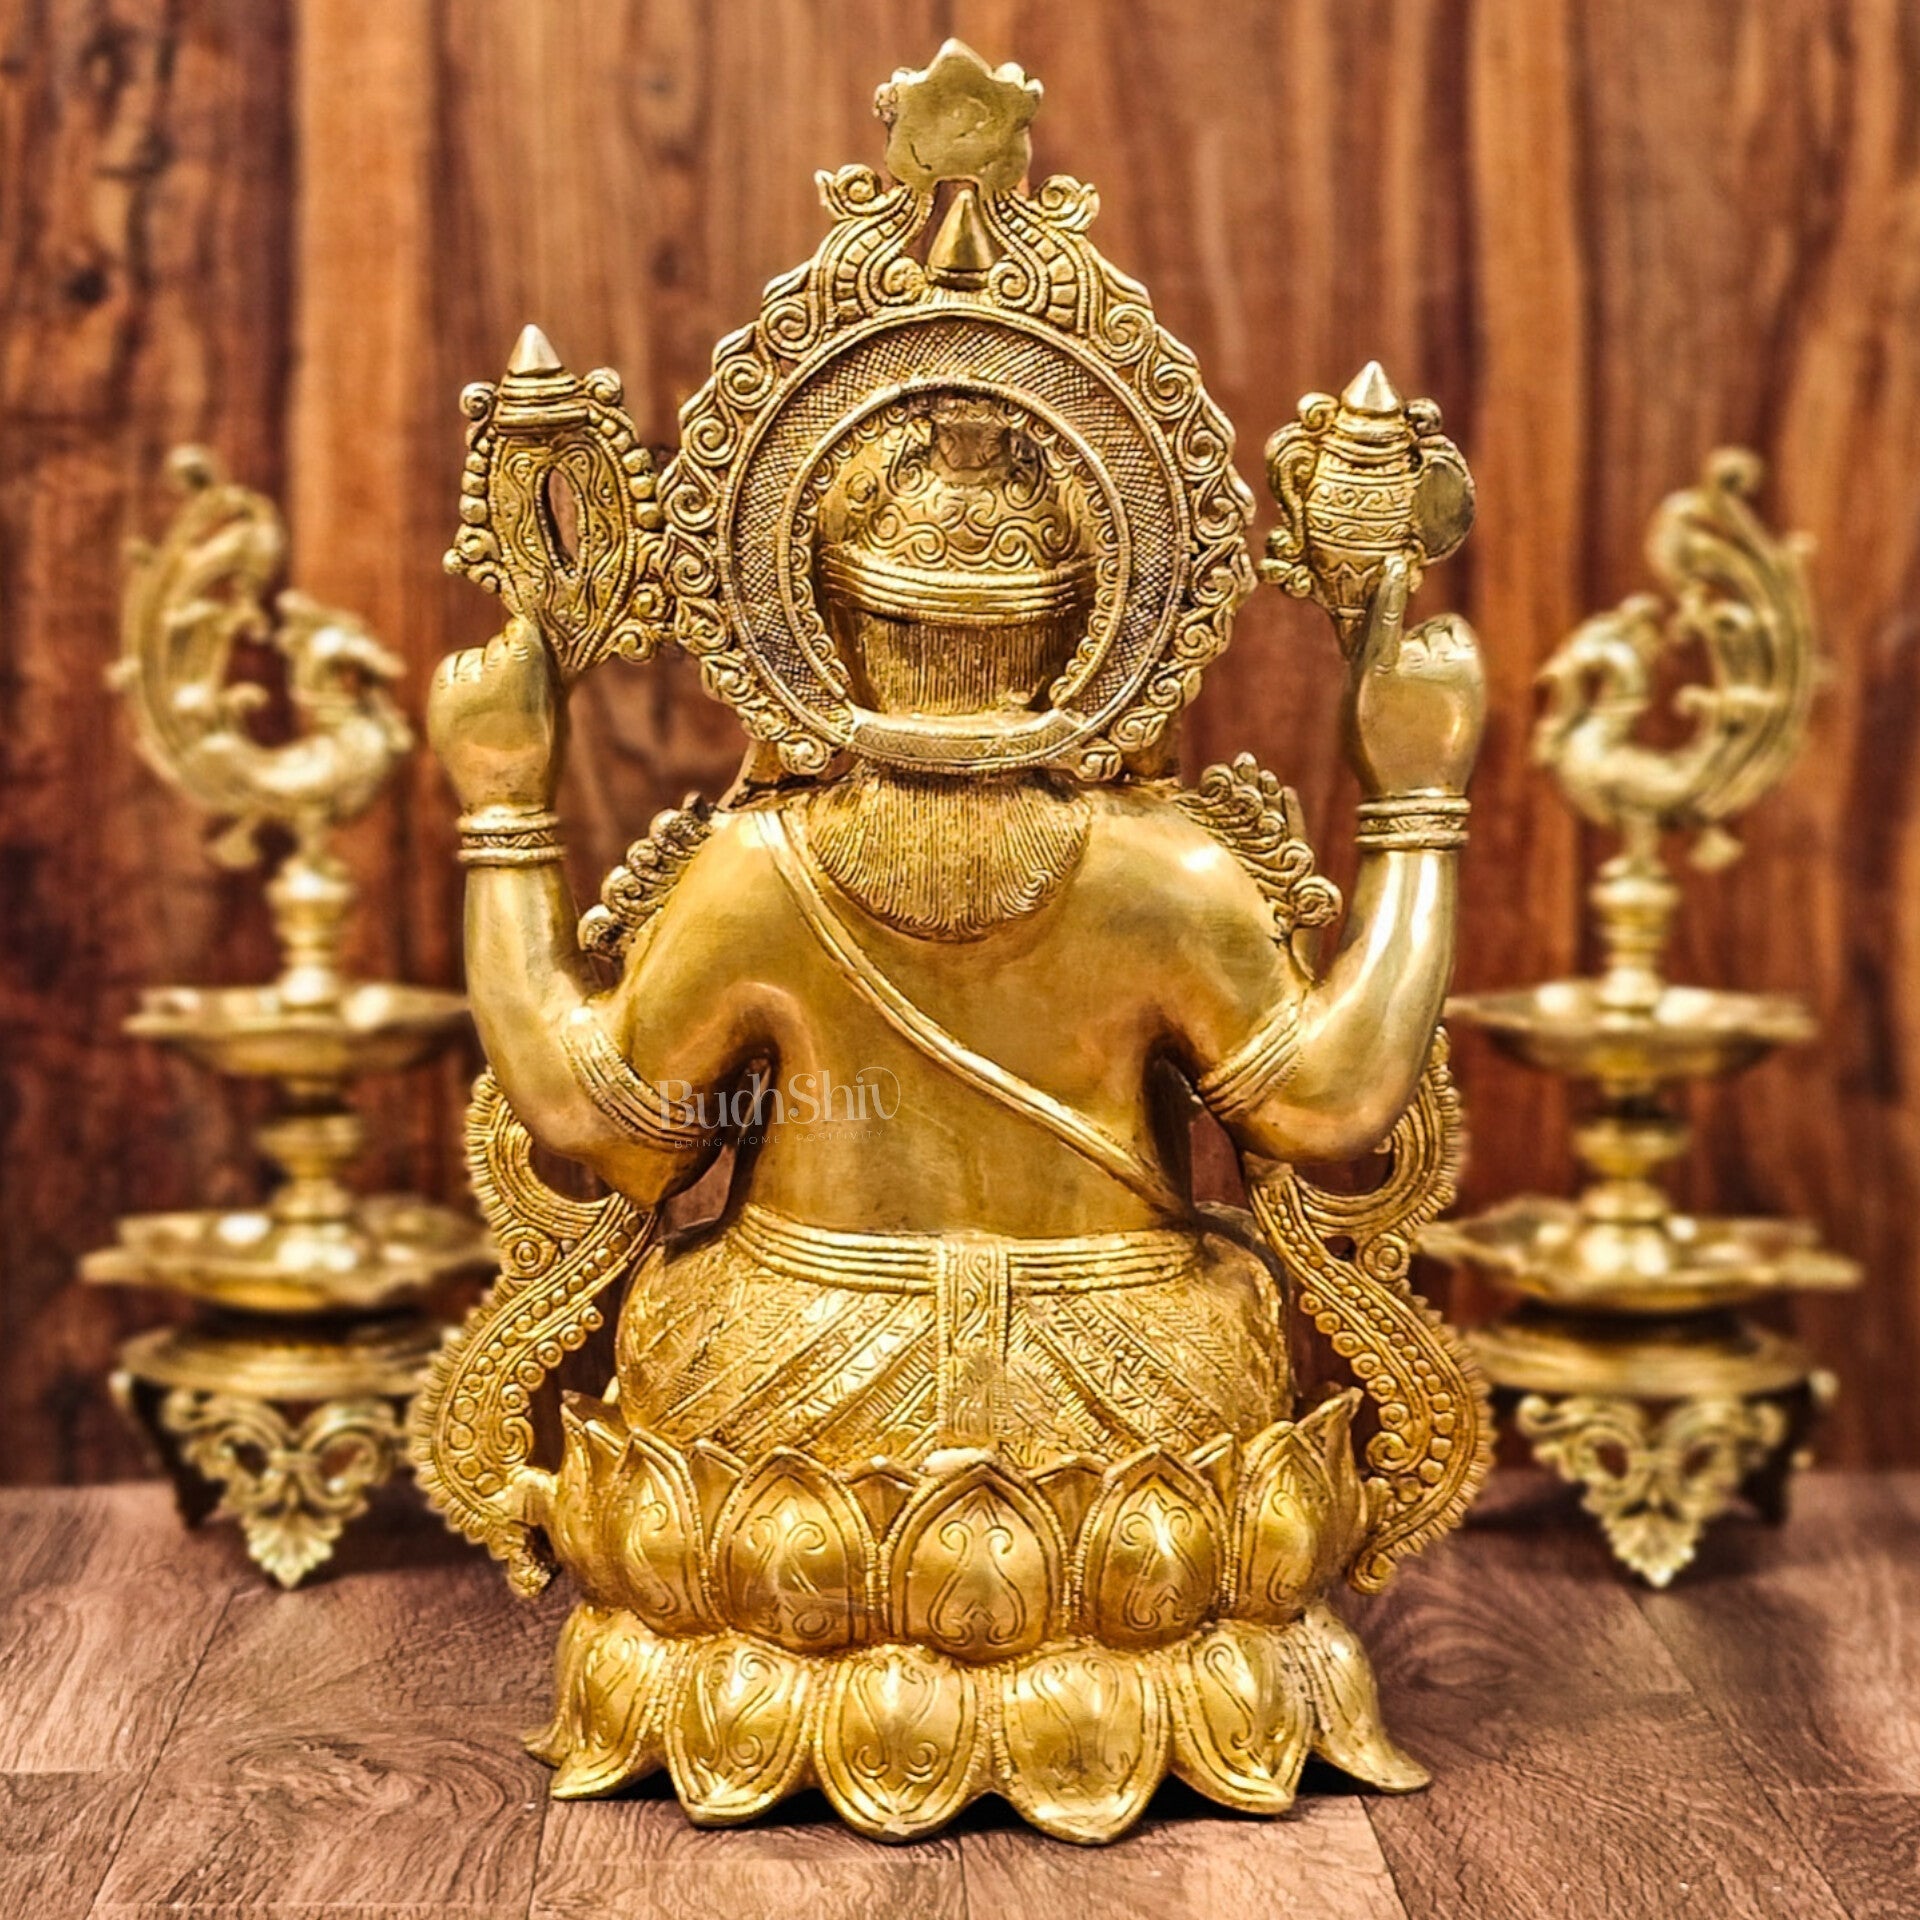 Handcrafted Fine Brass Ganesha Idol with Mouse and Detailed Jewelry 21" - Budhshiv.com